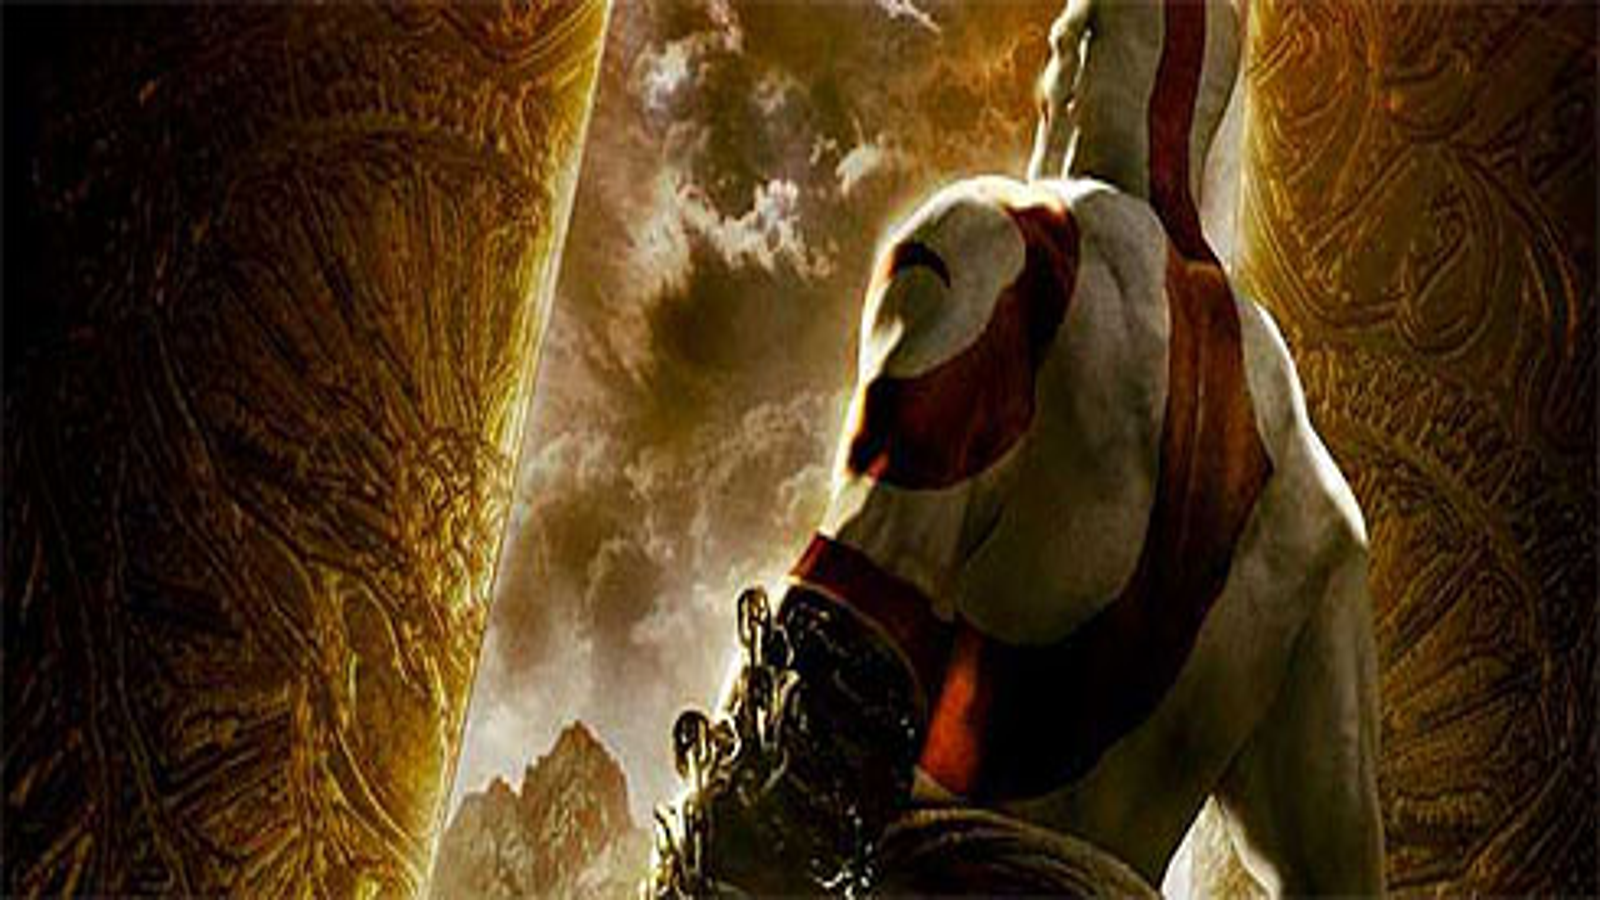 God of War III - Cover Story Hub March 2009 - Game Informer